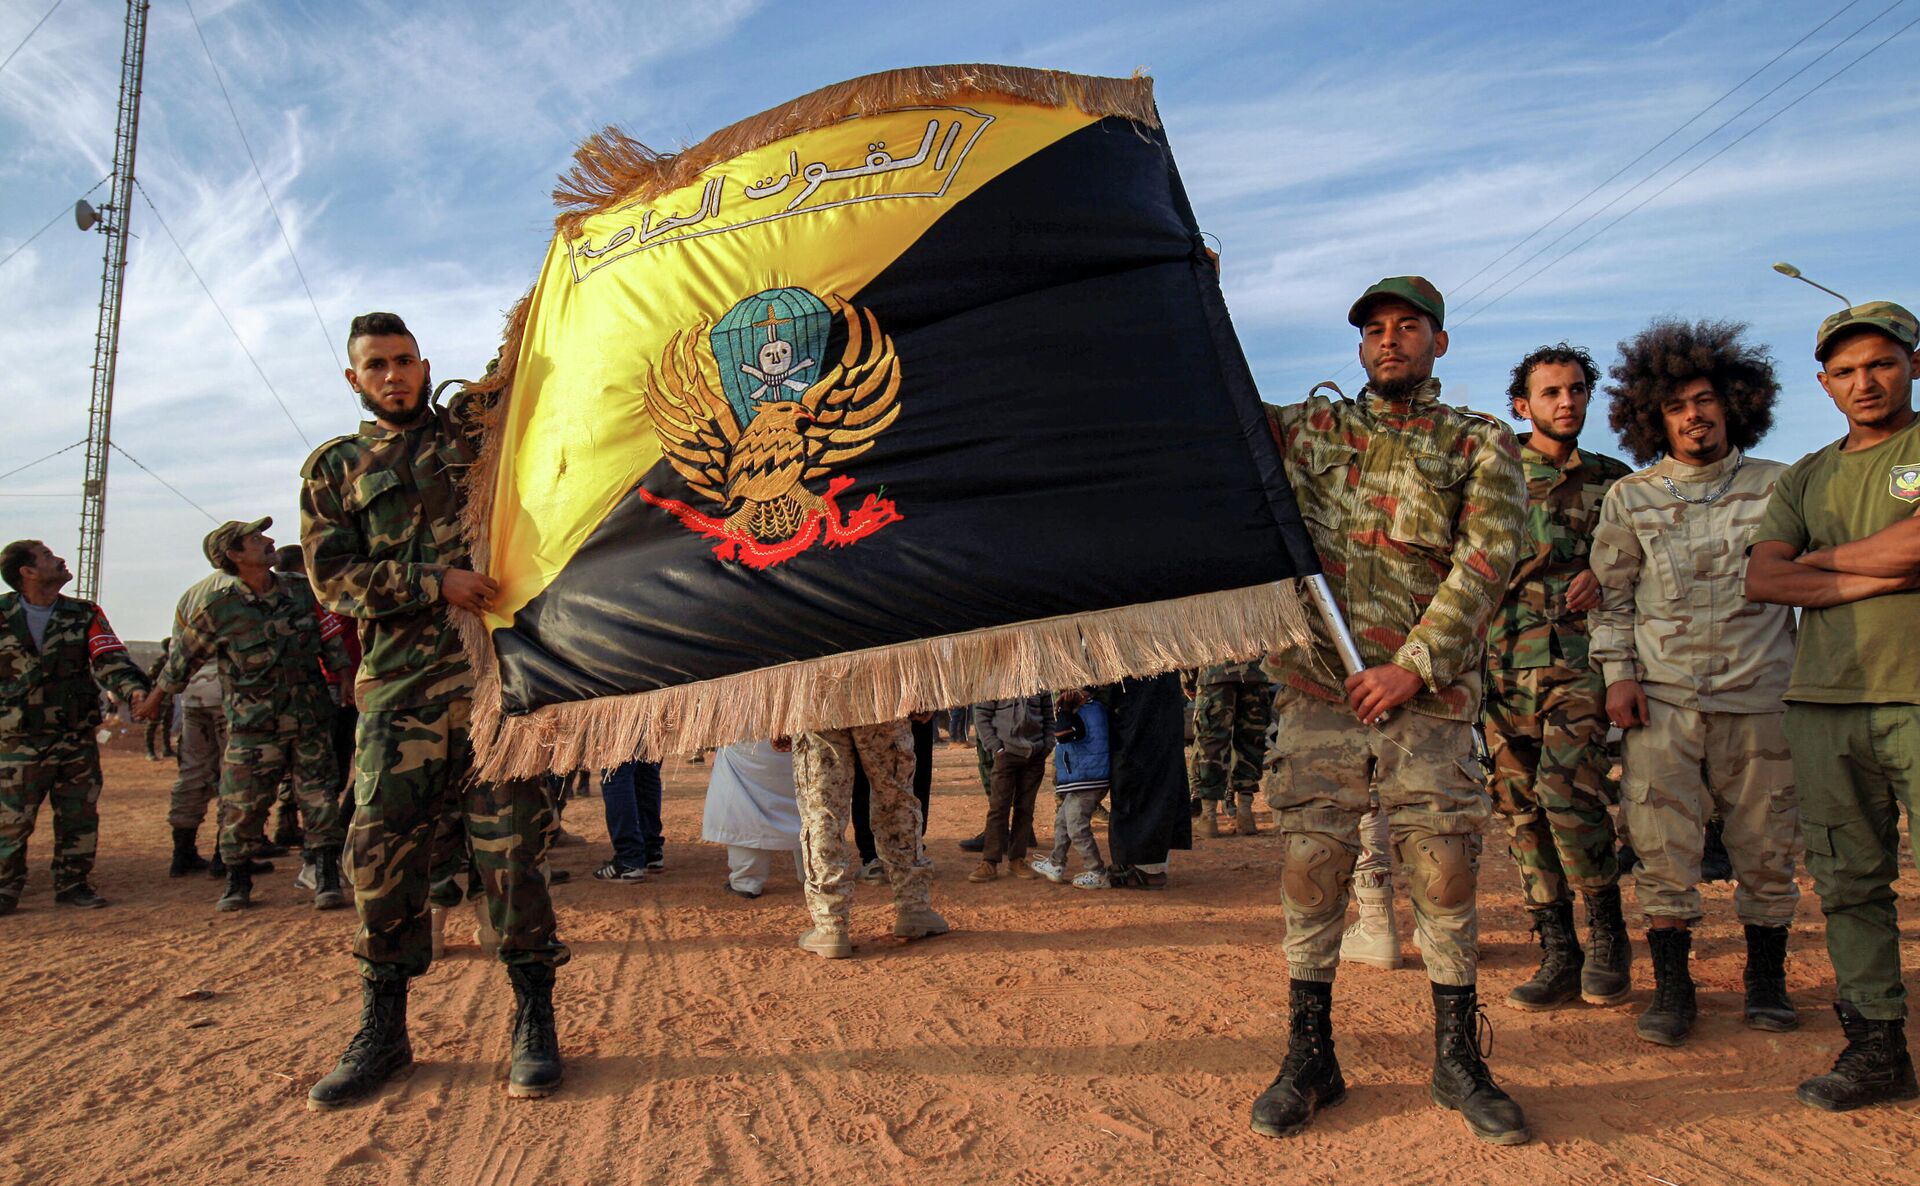 Members of the the Saiqa (Special Forces) of the self-proclaimed Libyan National Army (LNA), loyal to eastern strongman Khalifa Haftar, pose with their flag during an event in tribute to the unit's late commander General Wanis Bukhamada, who died a week prior, in the eastern city of Benghazi on November 6, 2020.  - Sputnik International, 1920, 28.08.2022